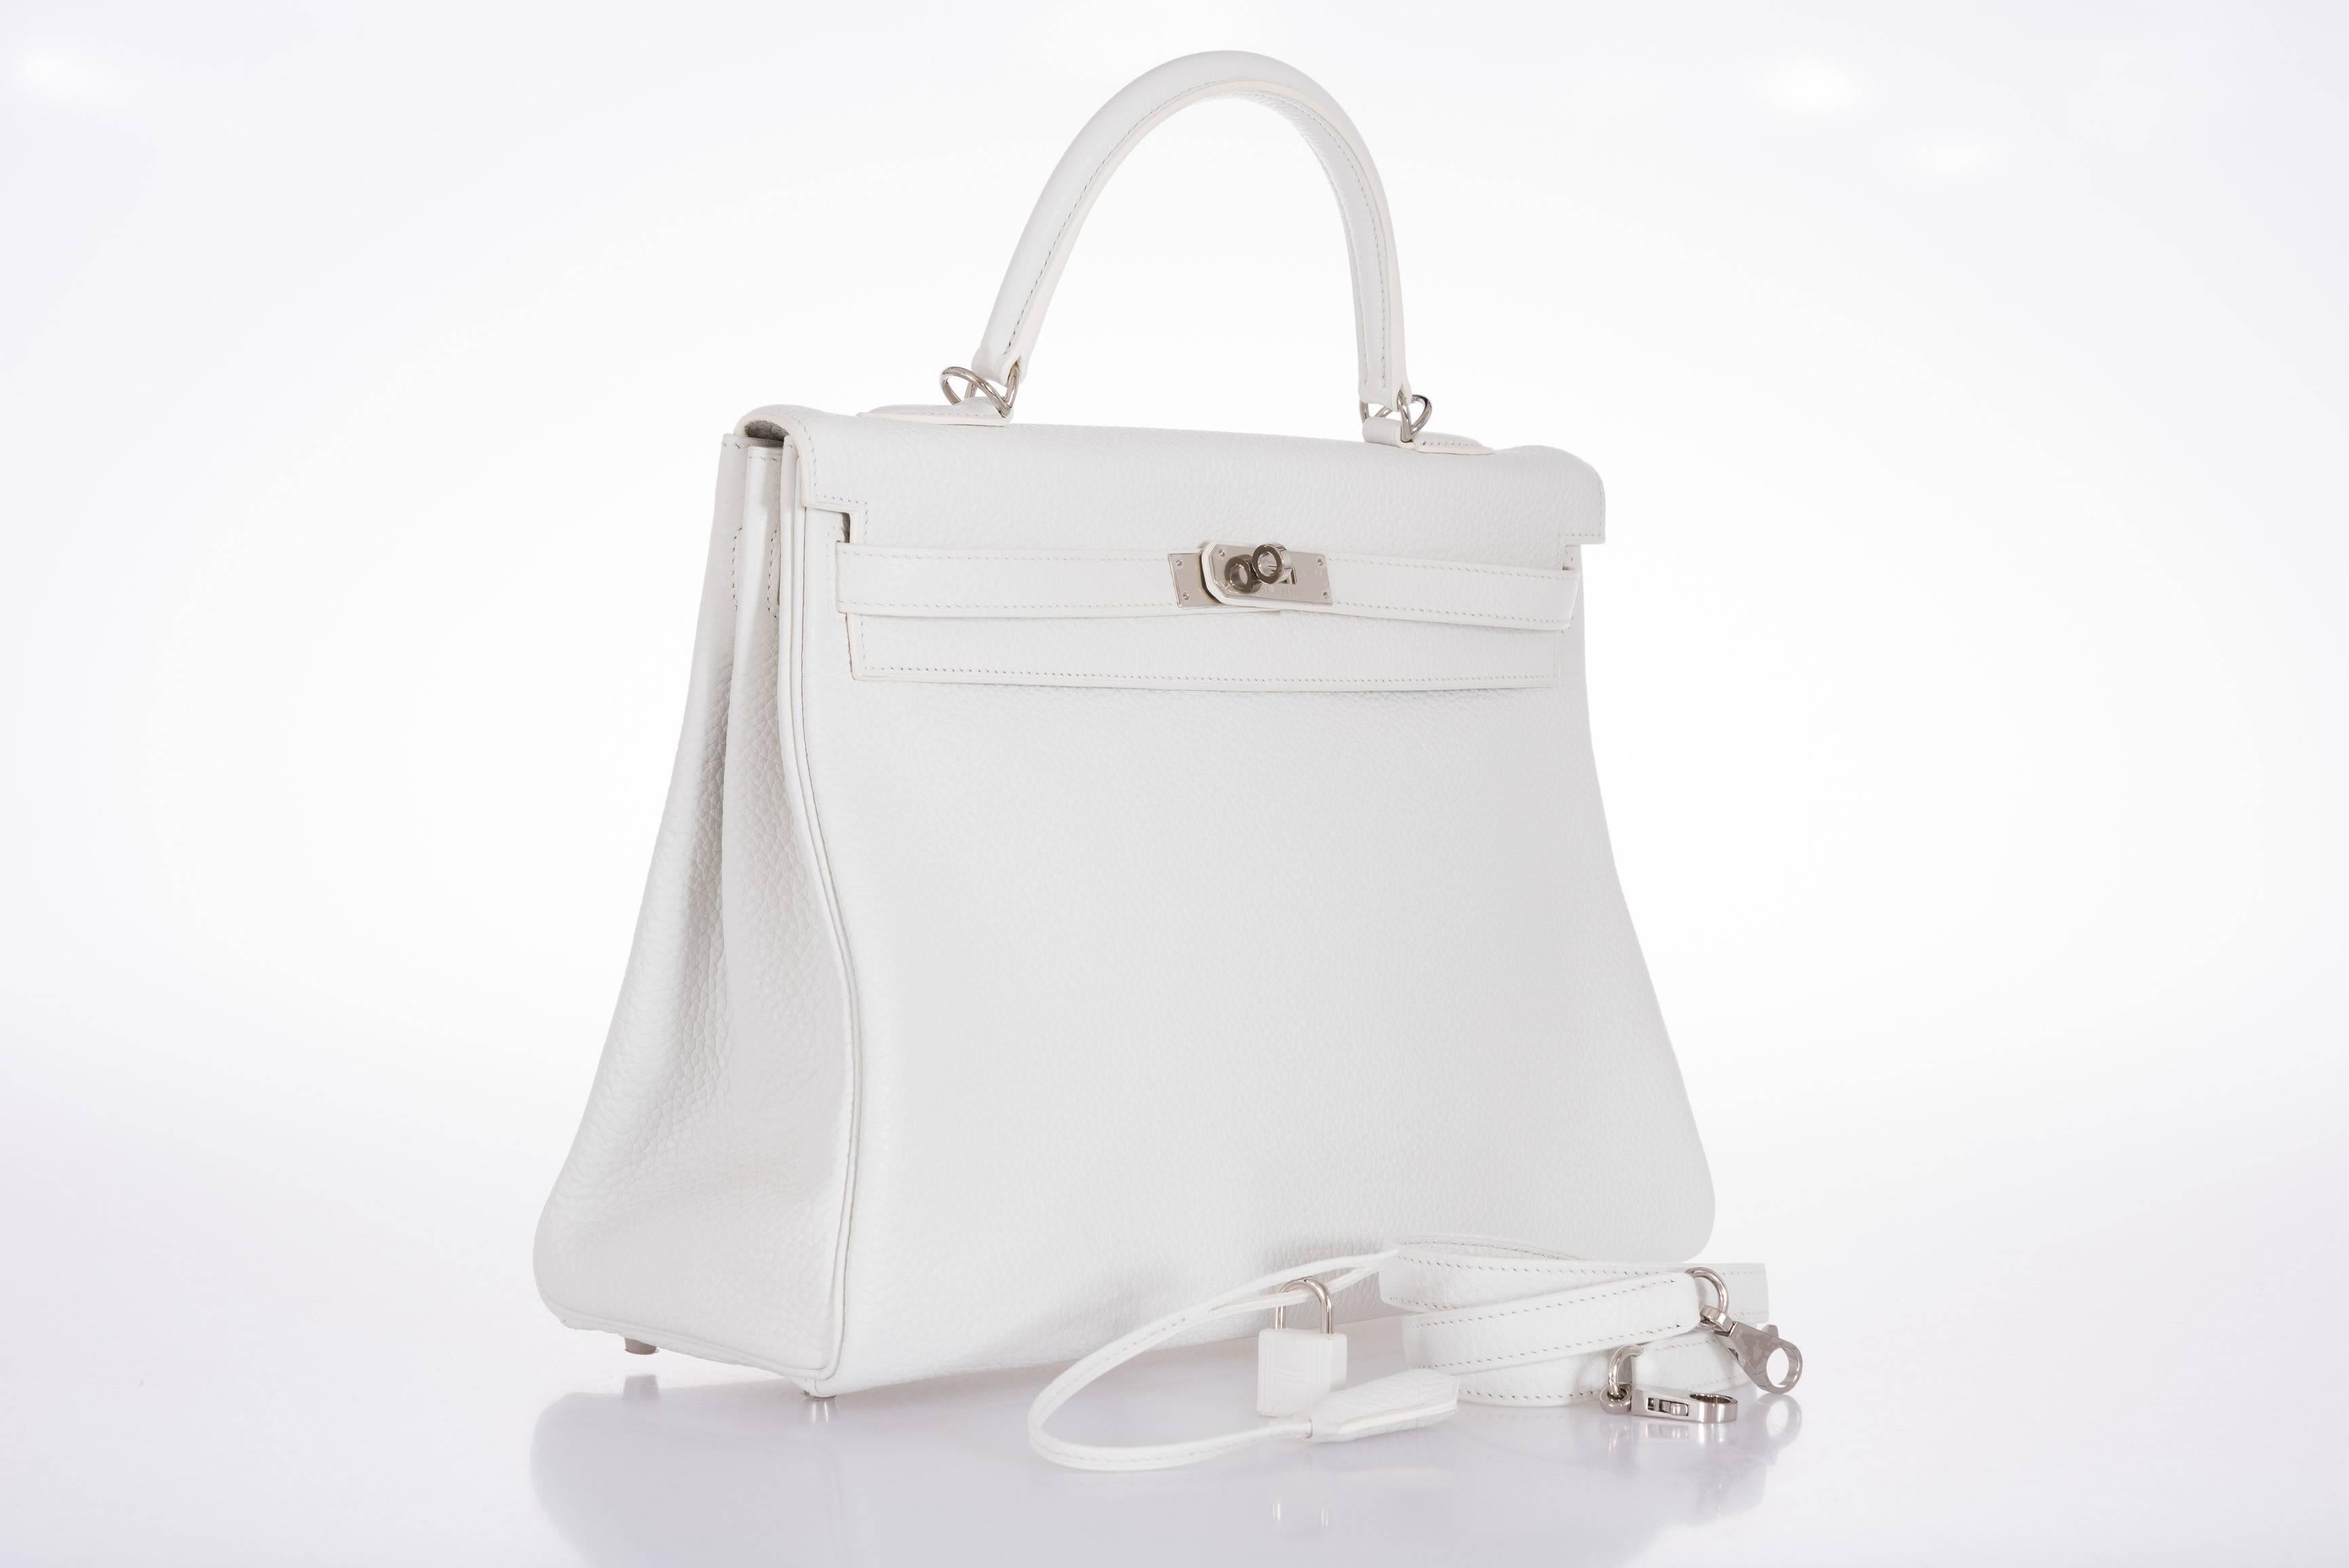 This 35cm Retourne Kelly bag by Hermès in white togo and features a top handle, shoulder strap, gold hardware, and the signature twist lock closure. Amazing White is a color that can be used in any season and any occasion such as on dates, during a